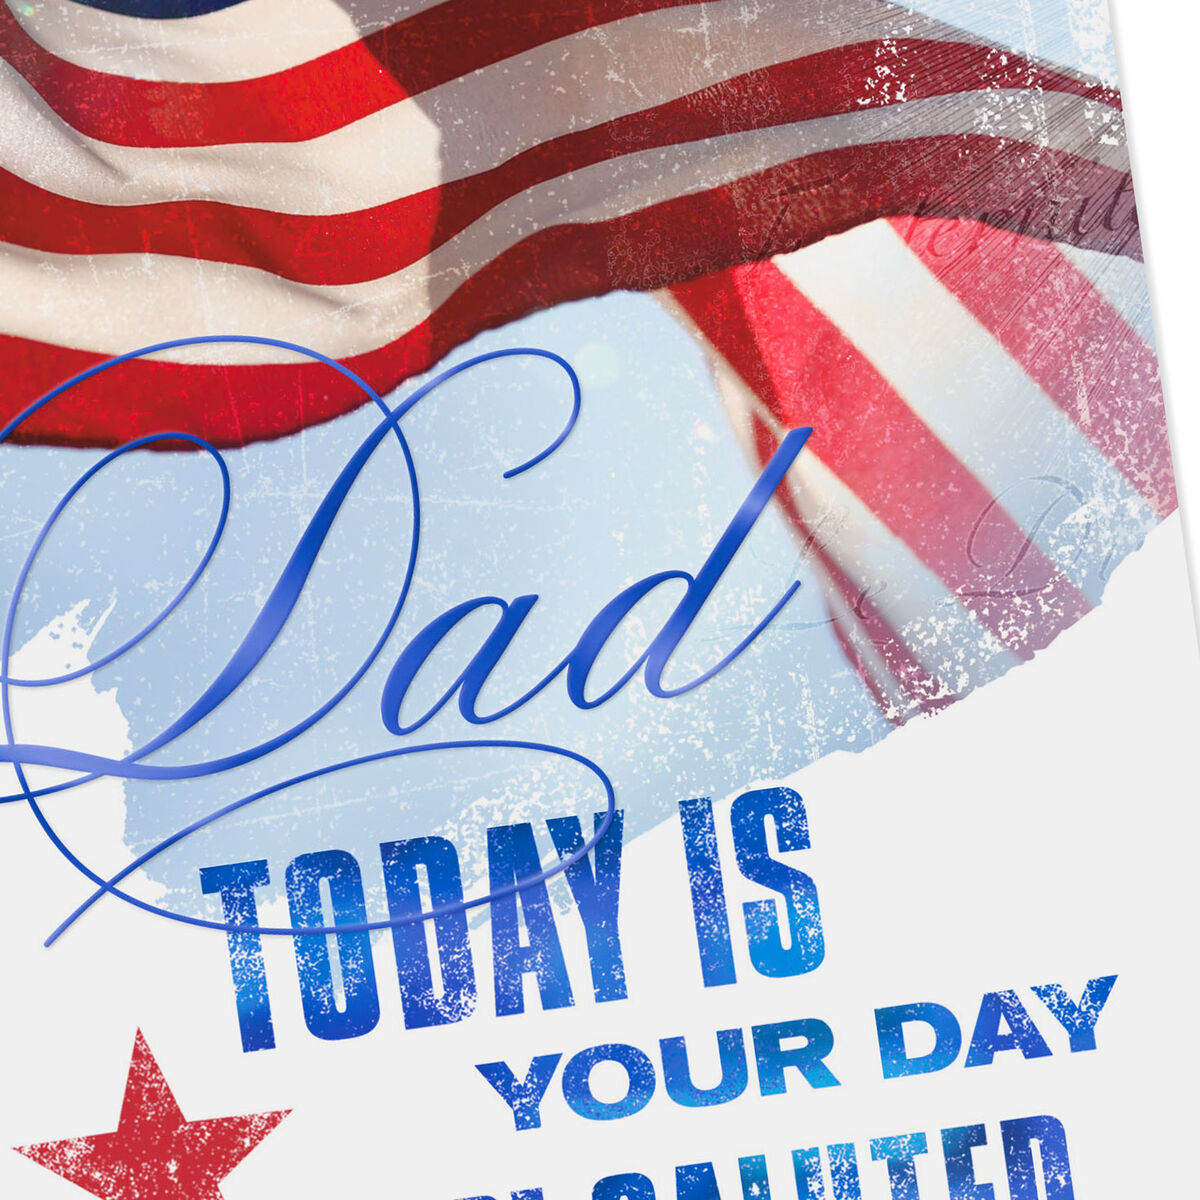 We Salute You Veterans Day Card for Dad - Greeting Cards - Hallmark